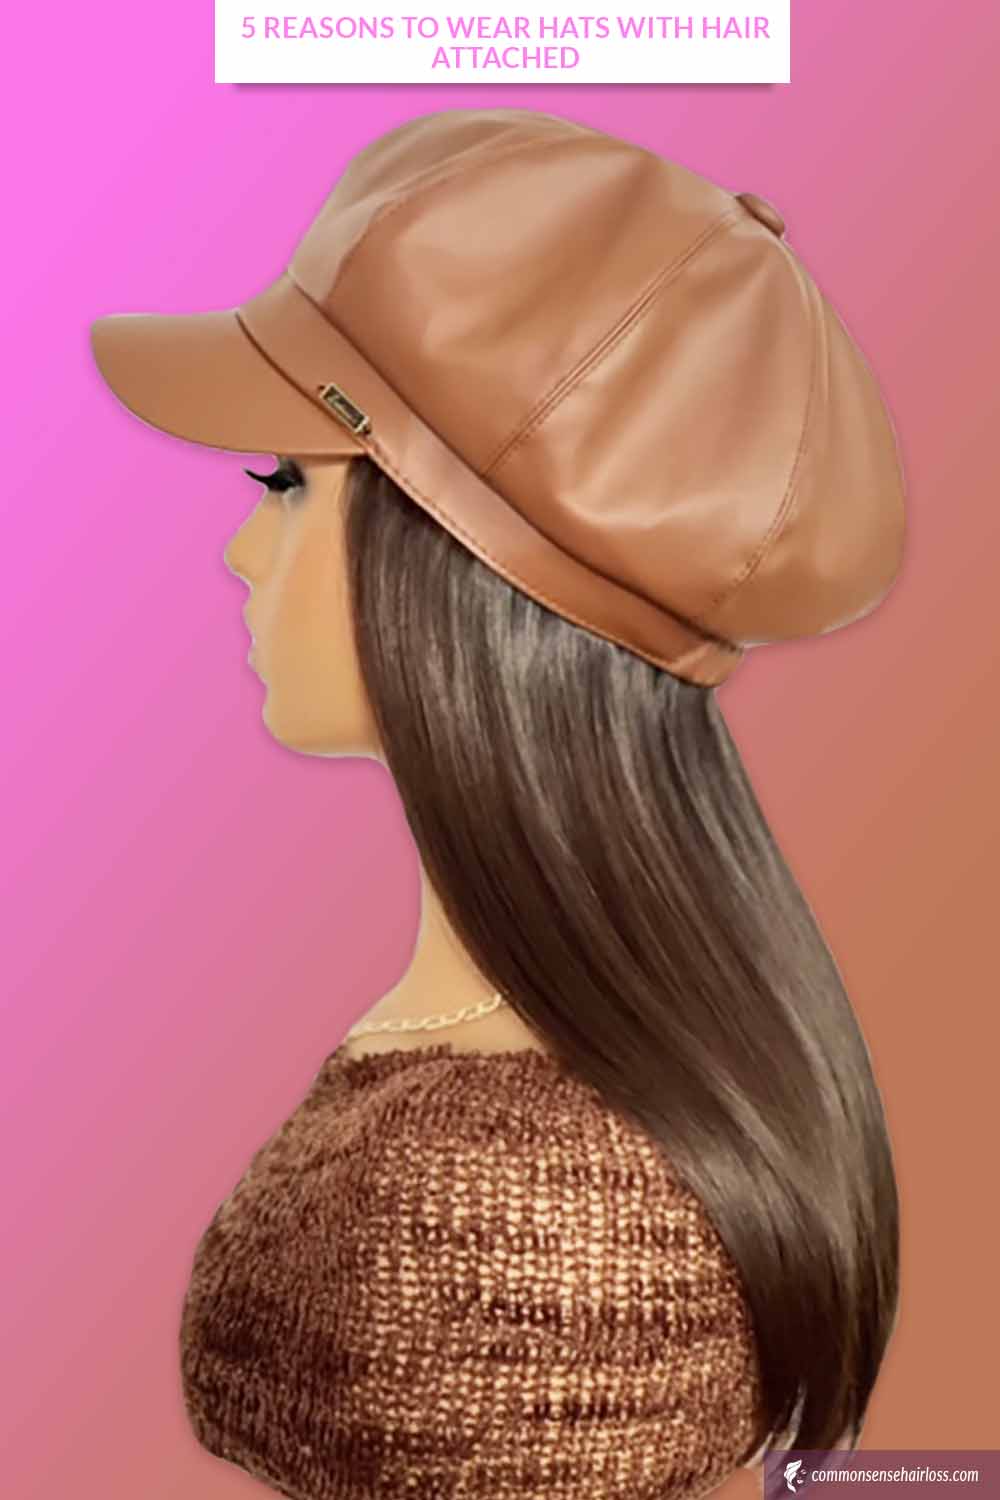 5 Reasons To Wear Hats With Hair Attached